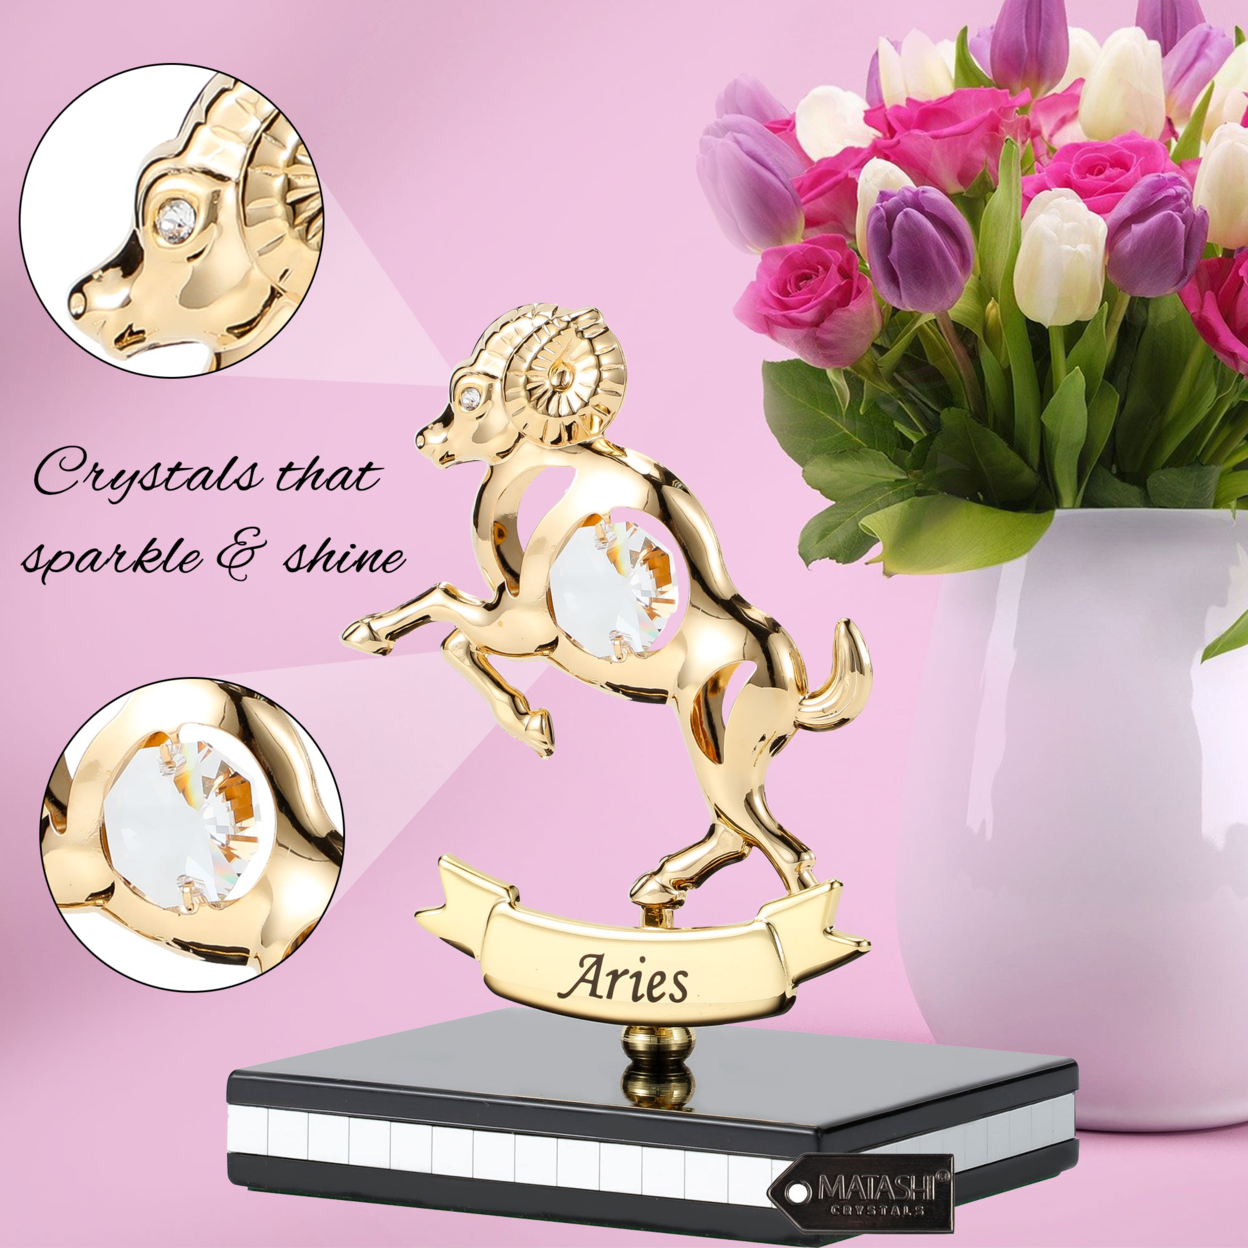 Matashi 24K Gold Plated Zodiac Astrological Sign Aries Figurine Statuette On Stand W/ Crystals Birthday Gift For Mom Girlfriend Boyfriend